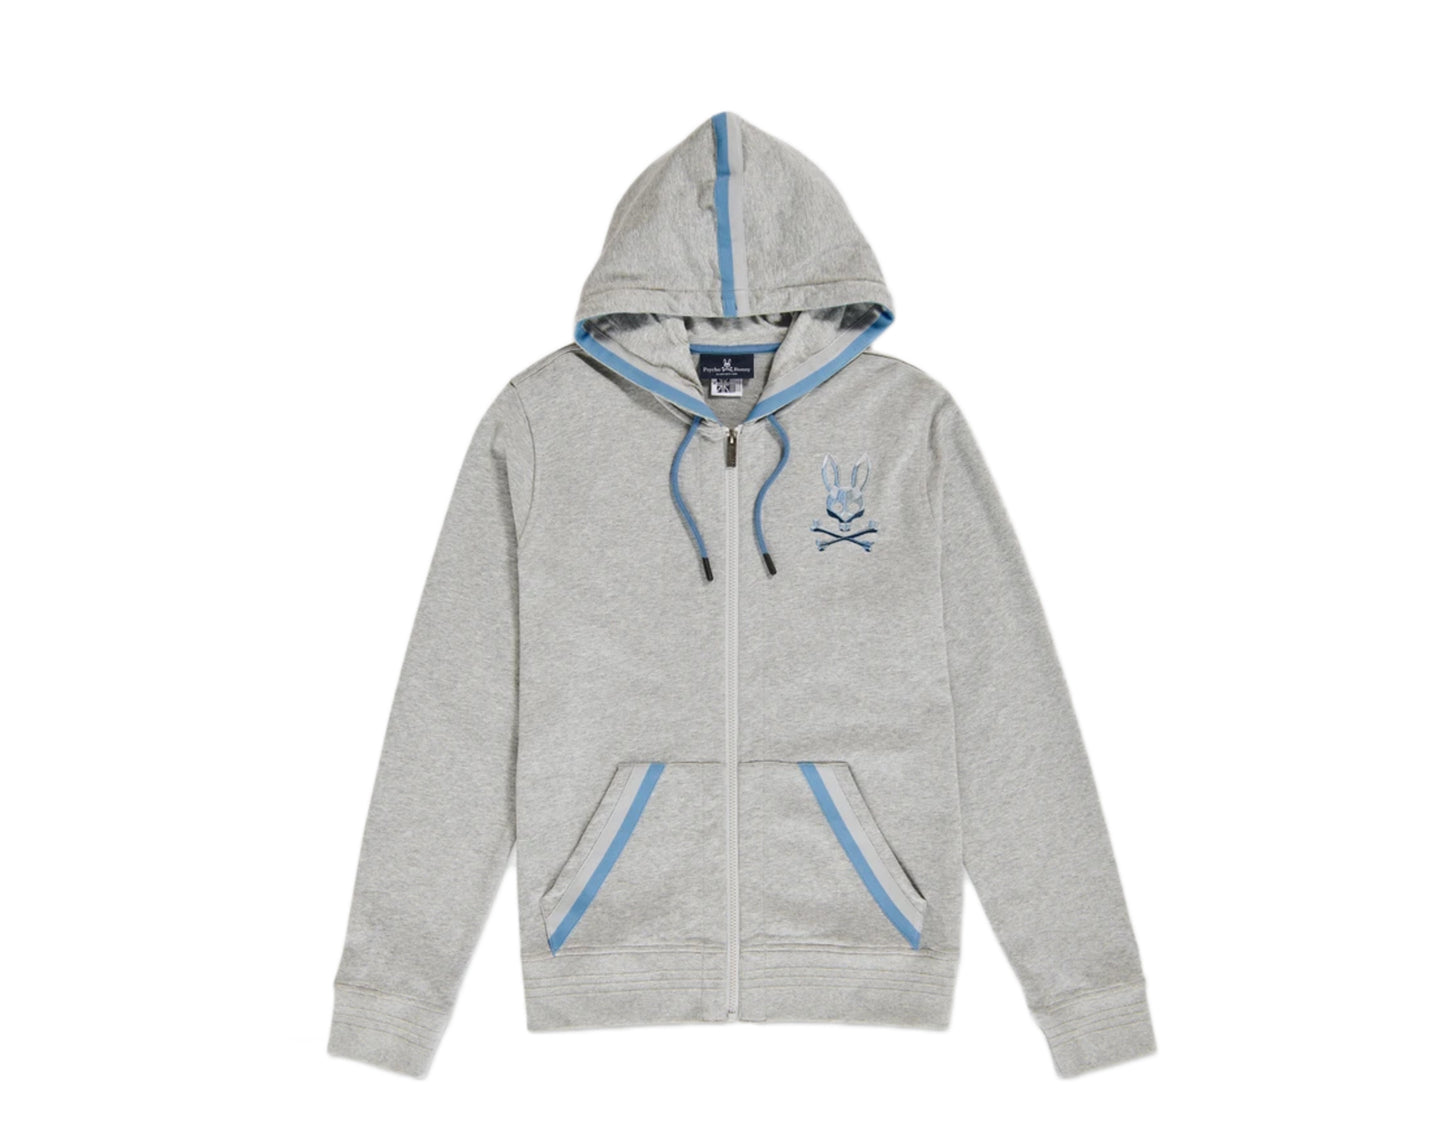 Psycho Bunny Priory Zip-Up Heather Grey/Blue Men's Hoodie B6H954L1FT-HGY